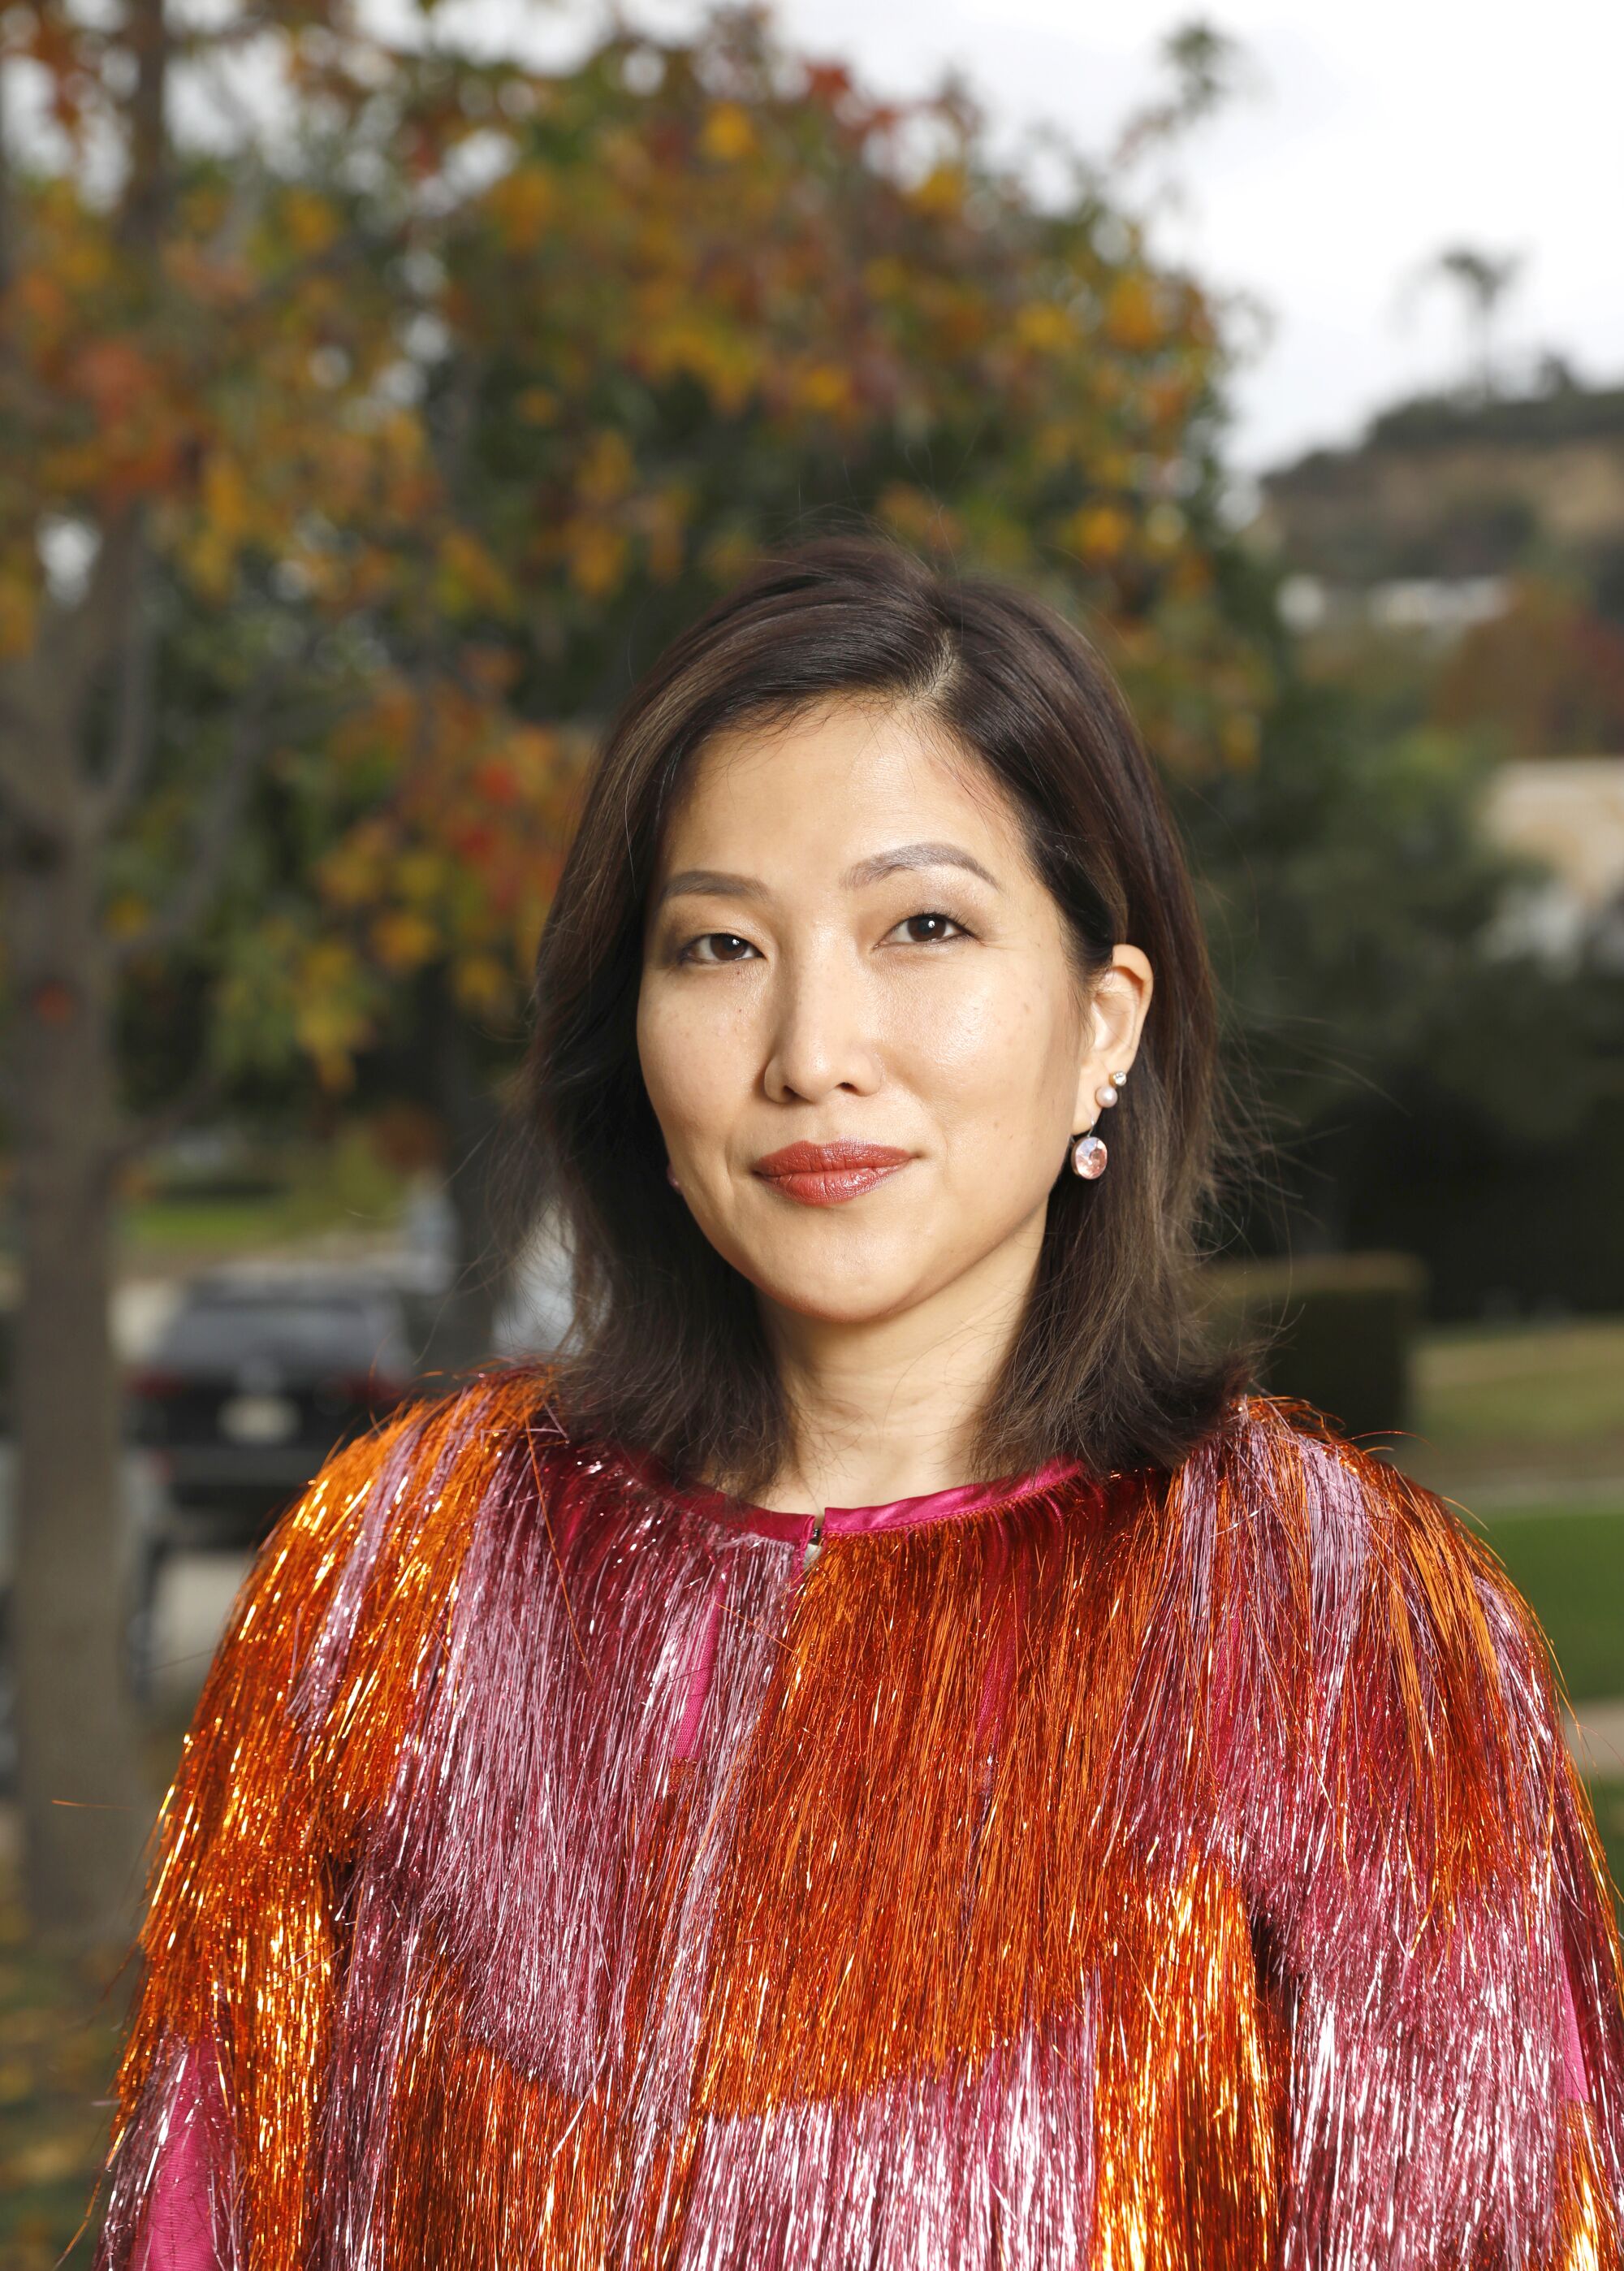 Los Angeles, California-Dec. 13, 2021-Jean Chen Ho's debut novel is titled "Fiona and Jane."